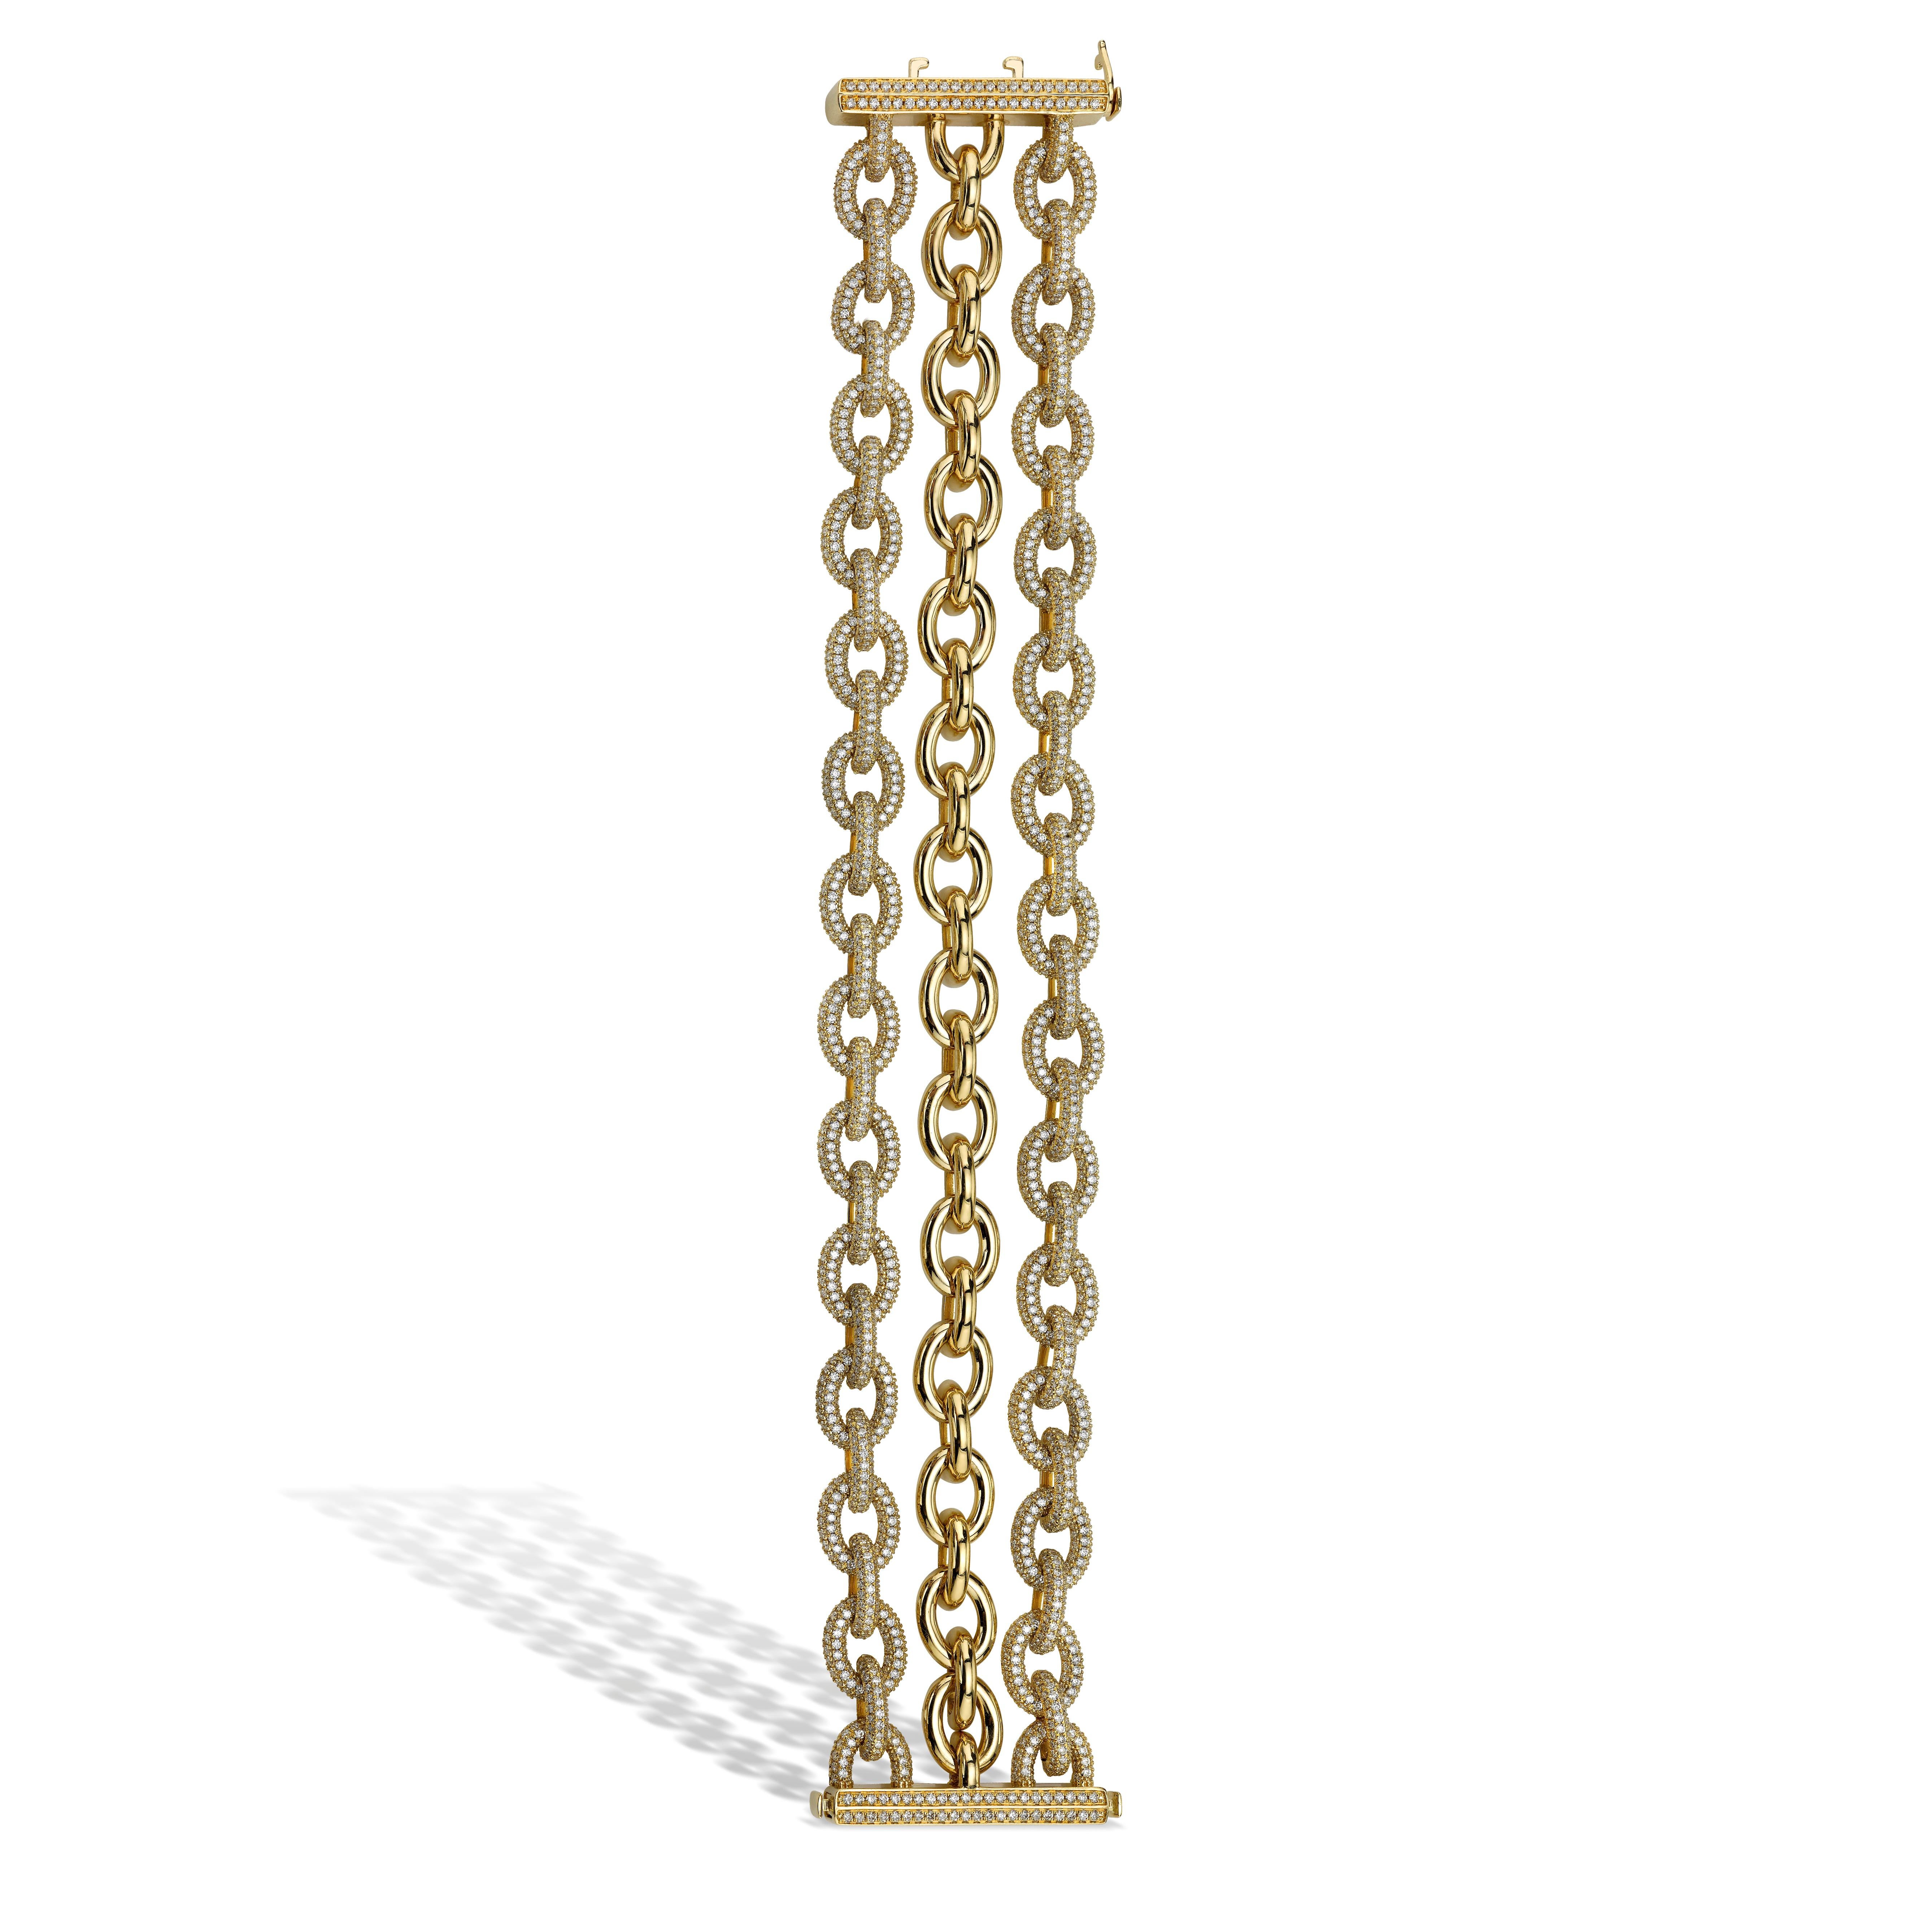 From the Bhansali CONNECT Collection, this chain link bracelet is set in 18kt Yellow Gold with 2,950 Round Brilliant-Cut Diamonds (9.11cts.) It is a perfect piece that can be worn on a gown as well as jeans. This understated, yet glamorous